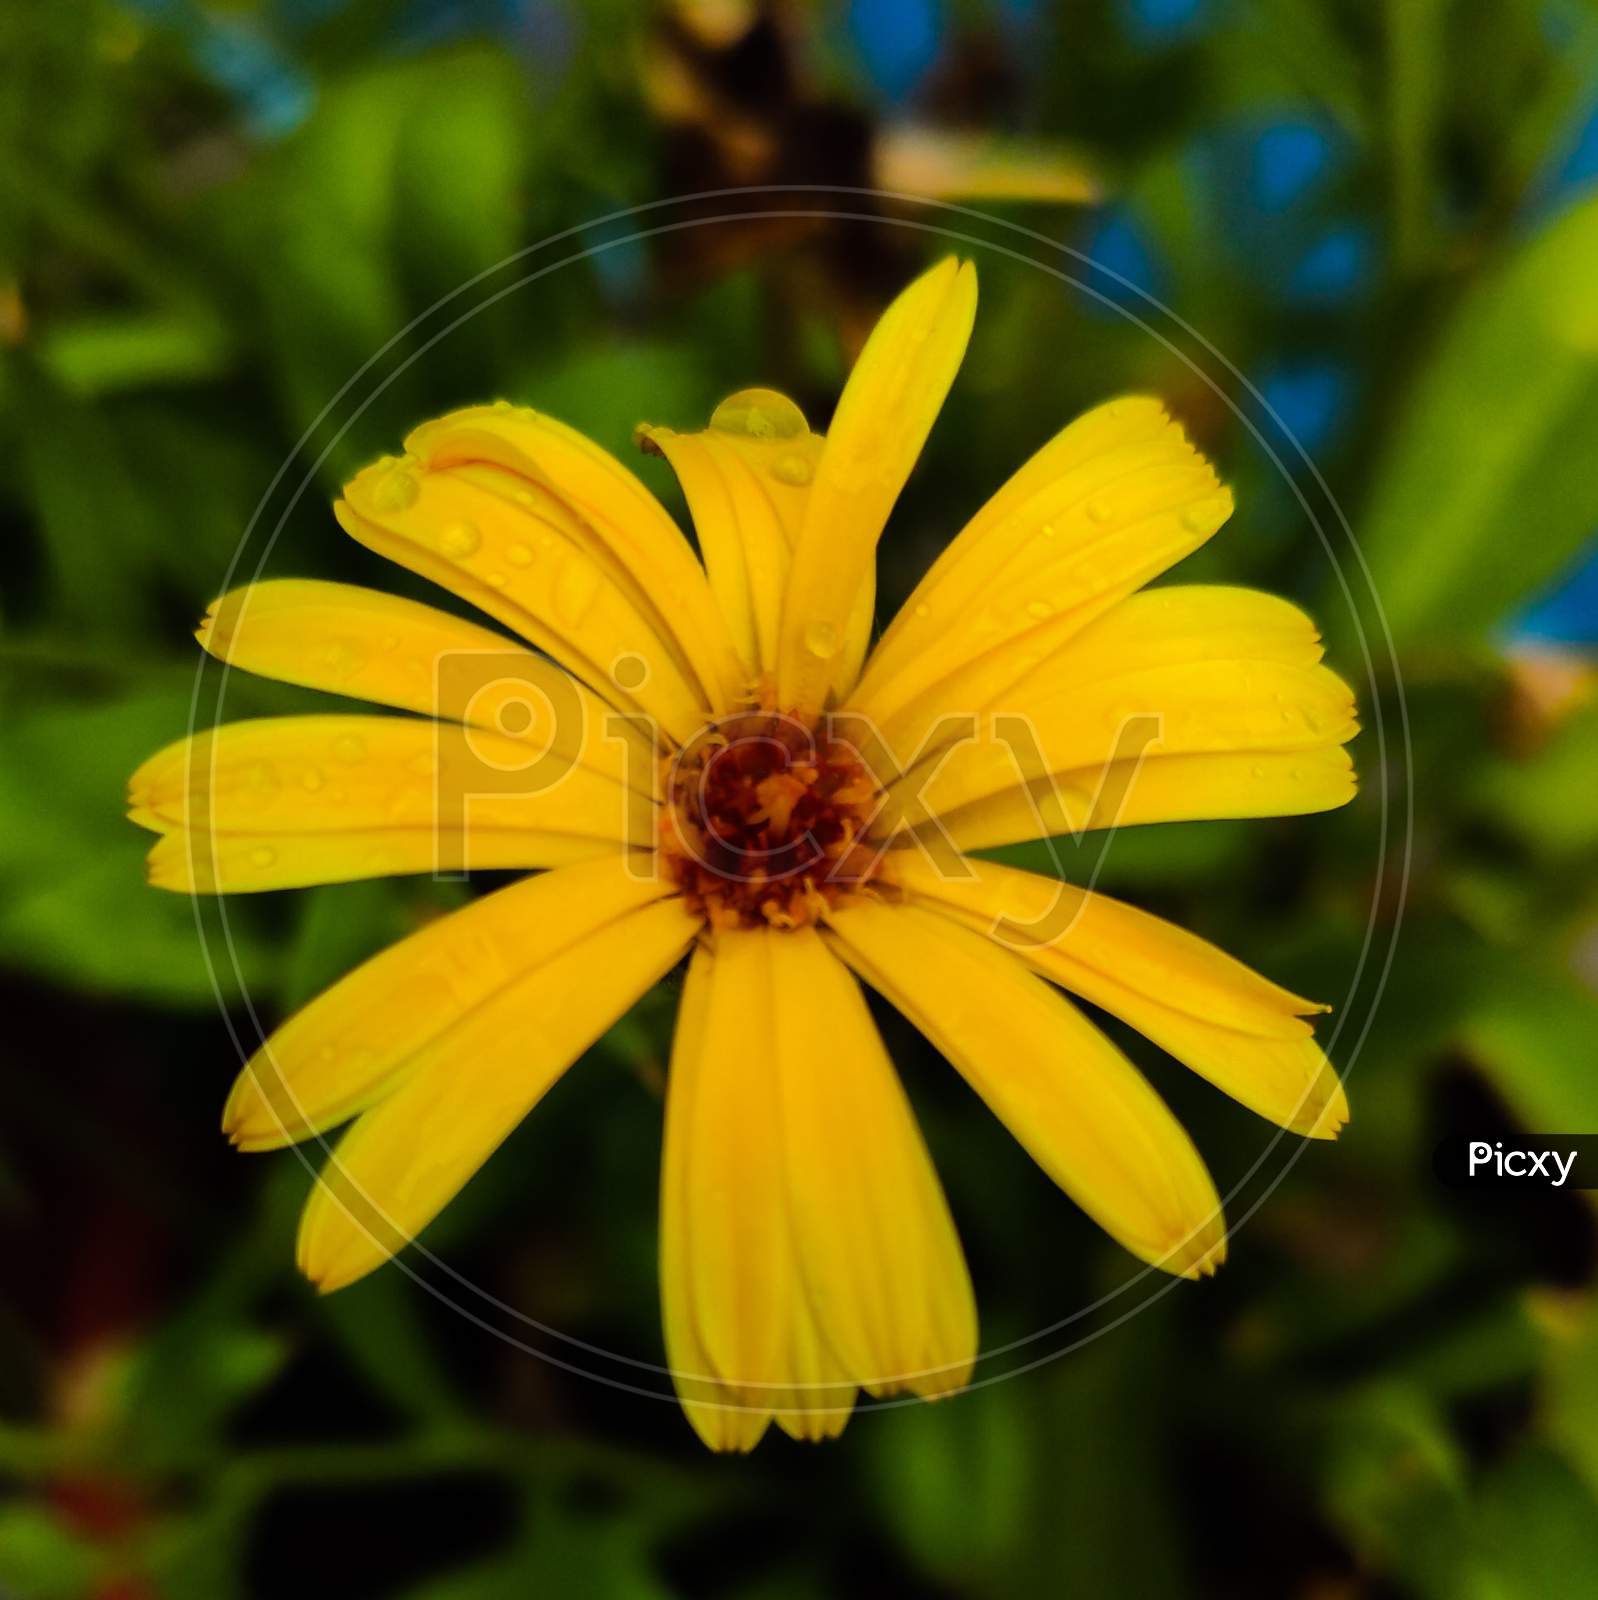 A close shot of tickseed yellow flower with water droplets on the petals